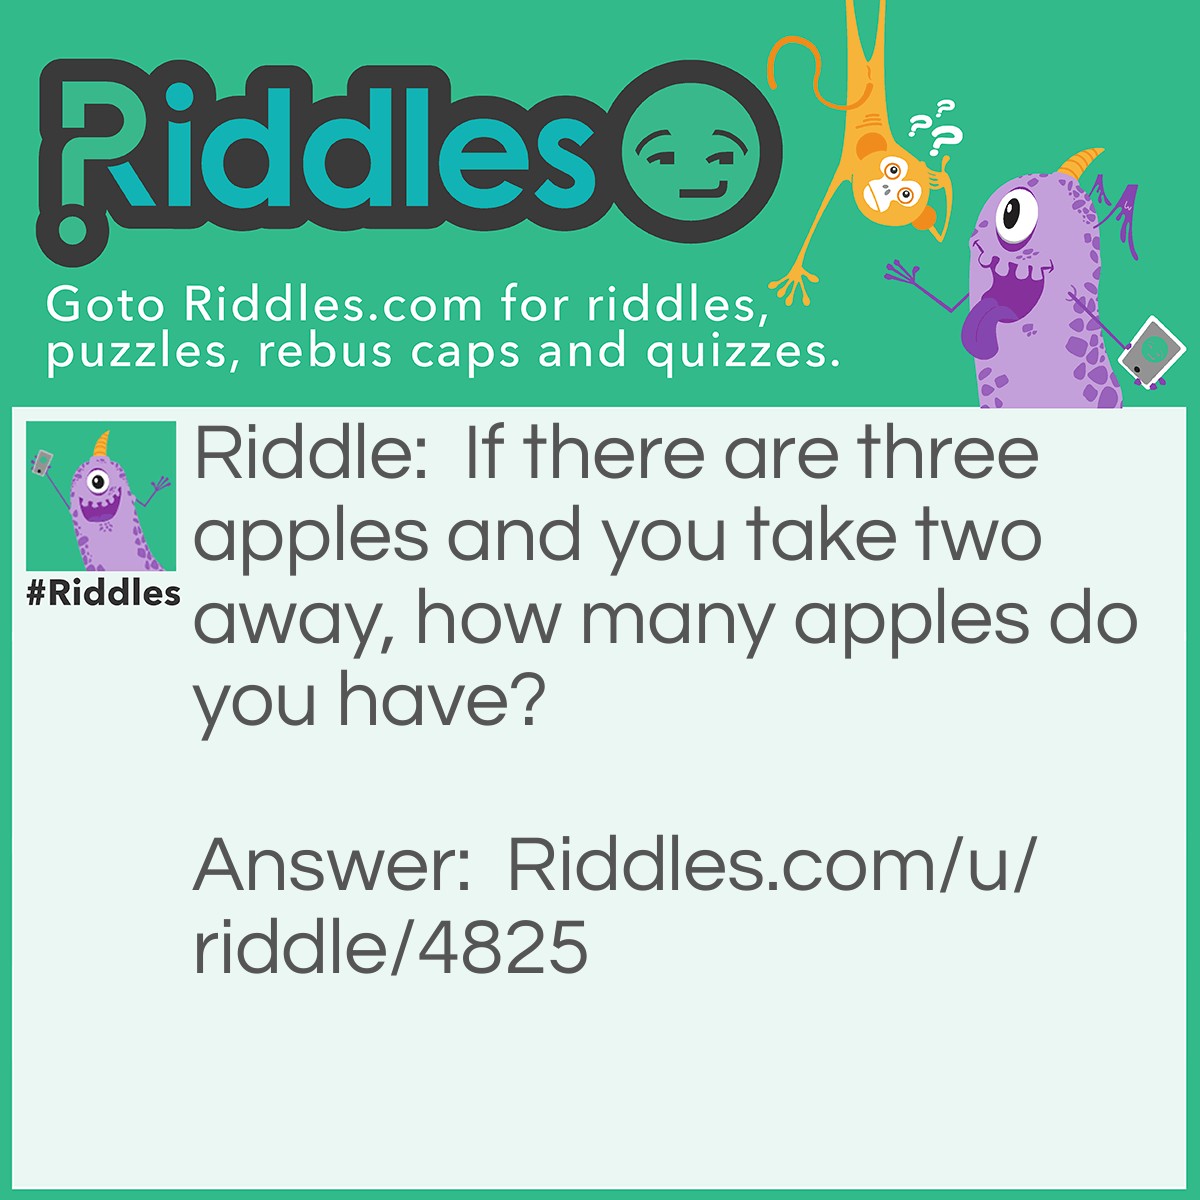 Riddle: If there are three apples and you take two away, how many apples do you have? Answer: You took two apples, so you now have two of them.